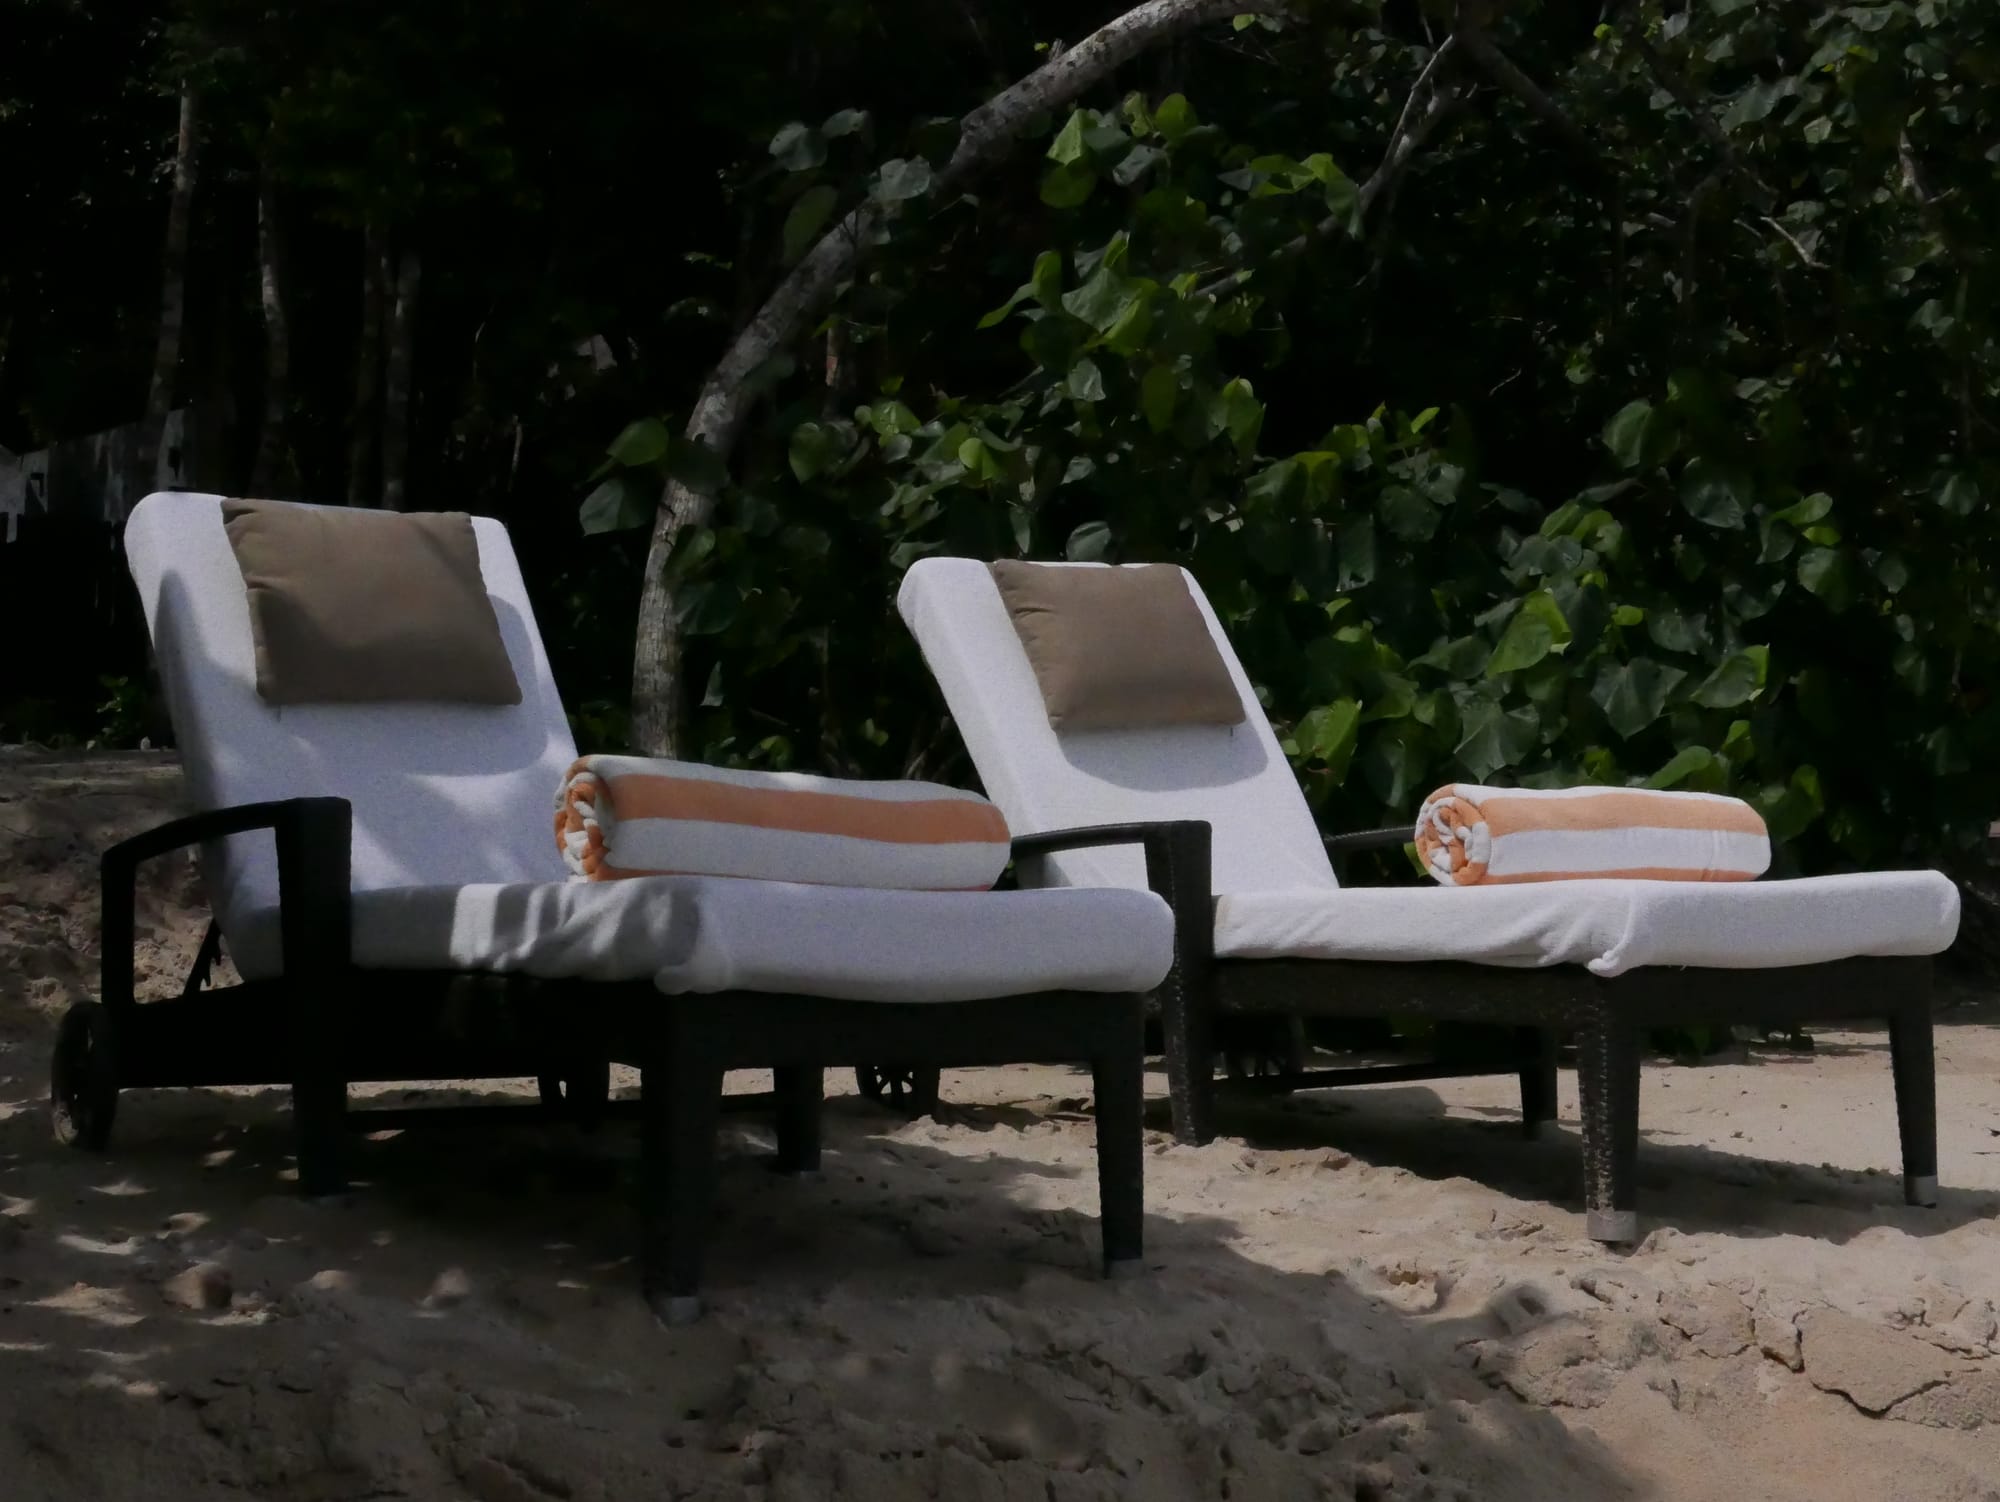 Photo by Author — sun loungers on the beach at the Andaman Hotel, Langkawi, Malaysia